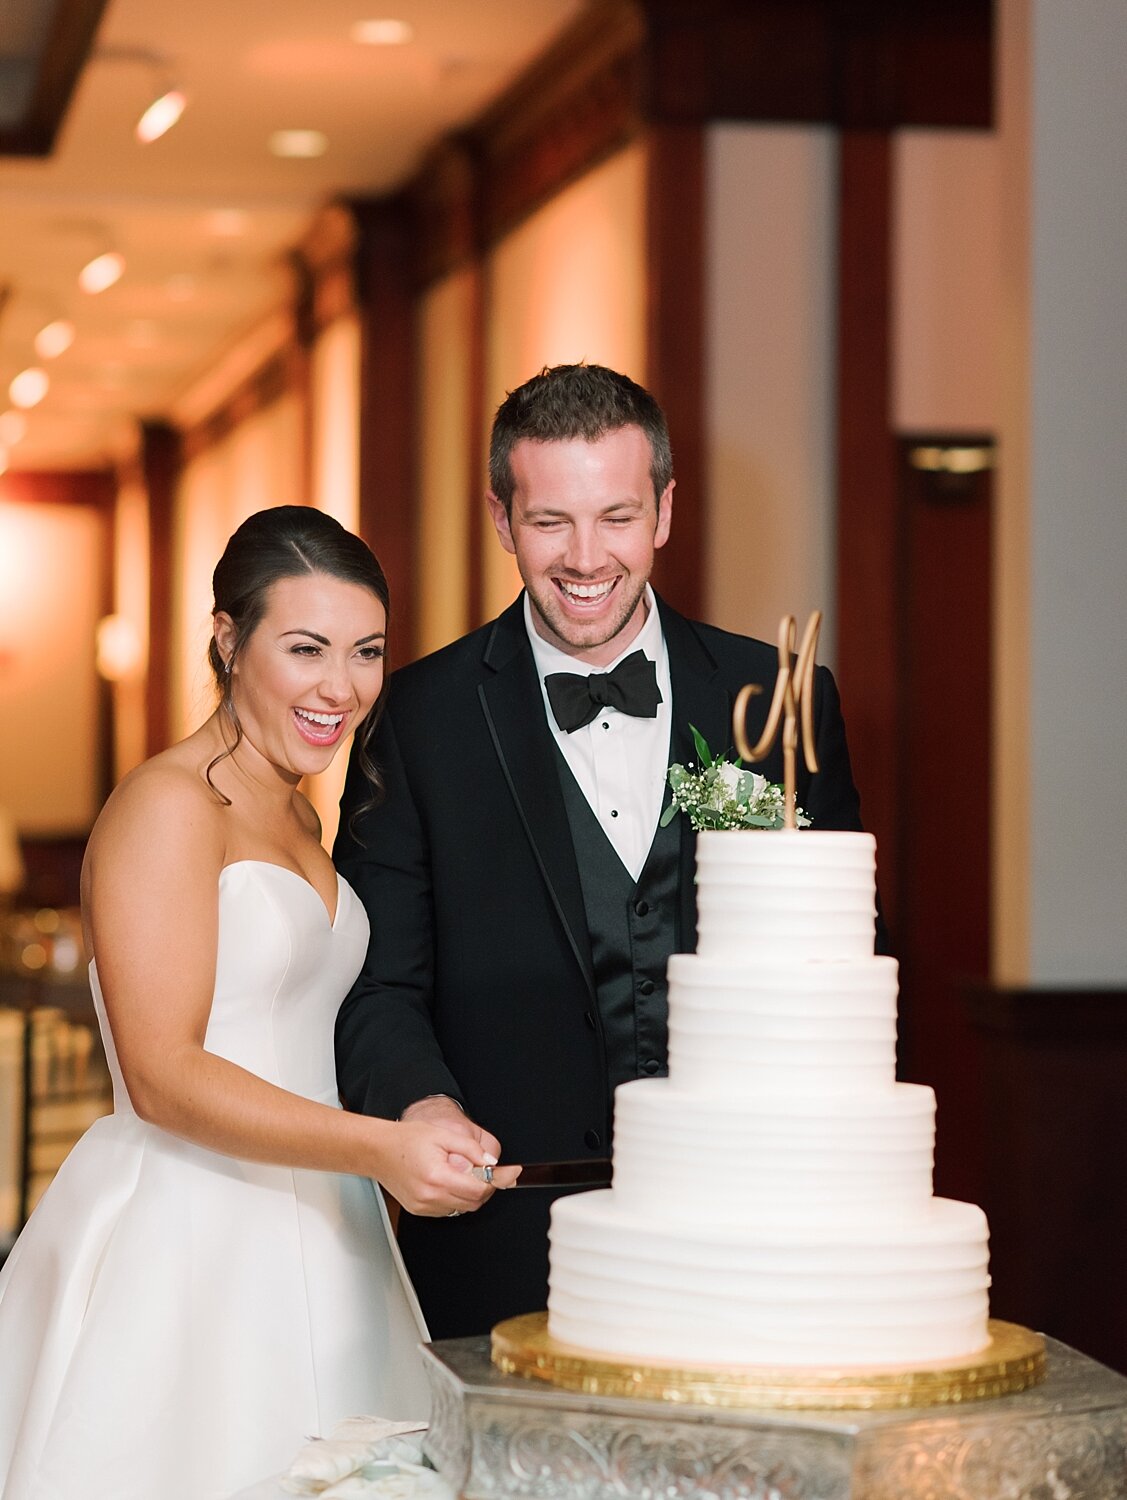 bride and groom cut cake from Dortoni Bakery photographed by Asher Gardner Photography